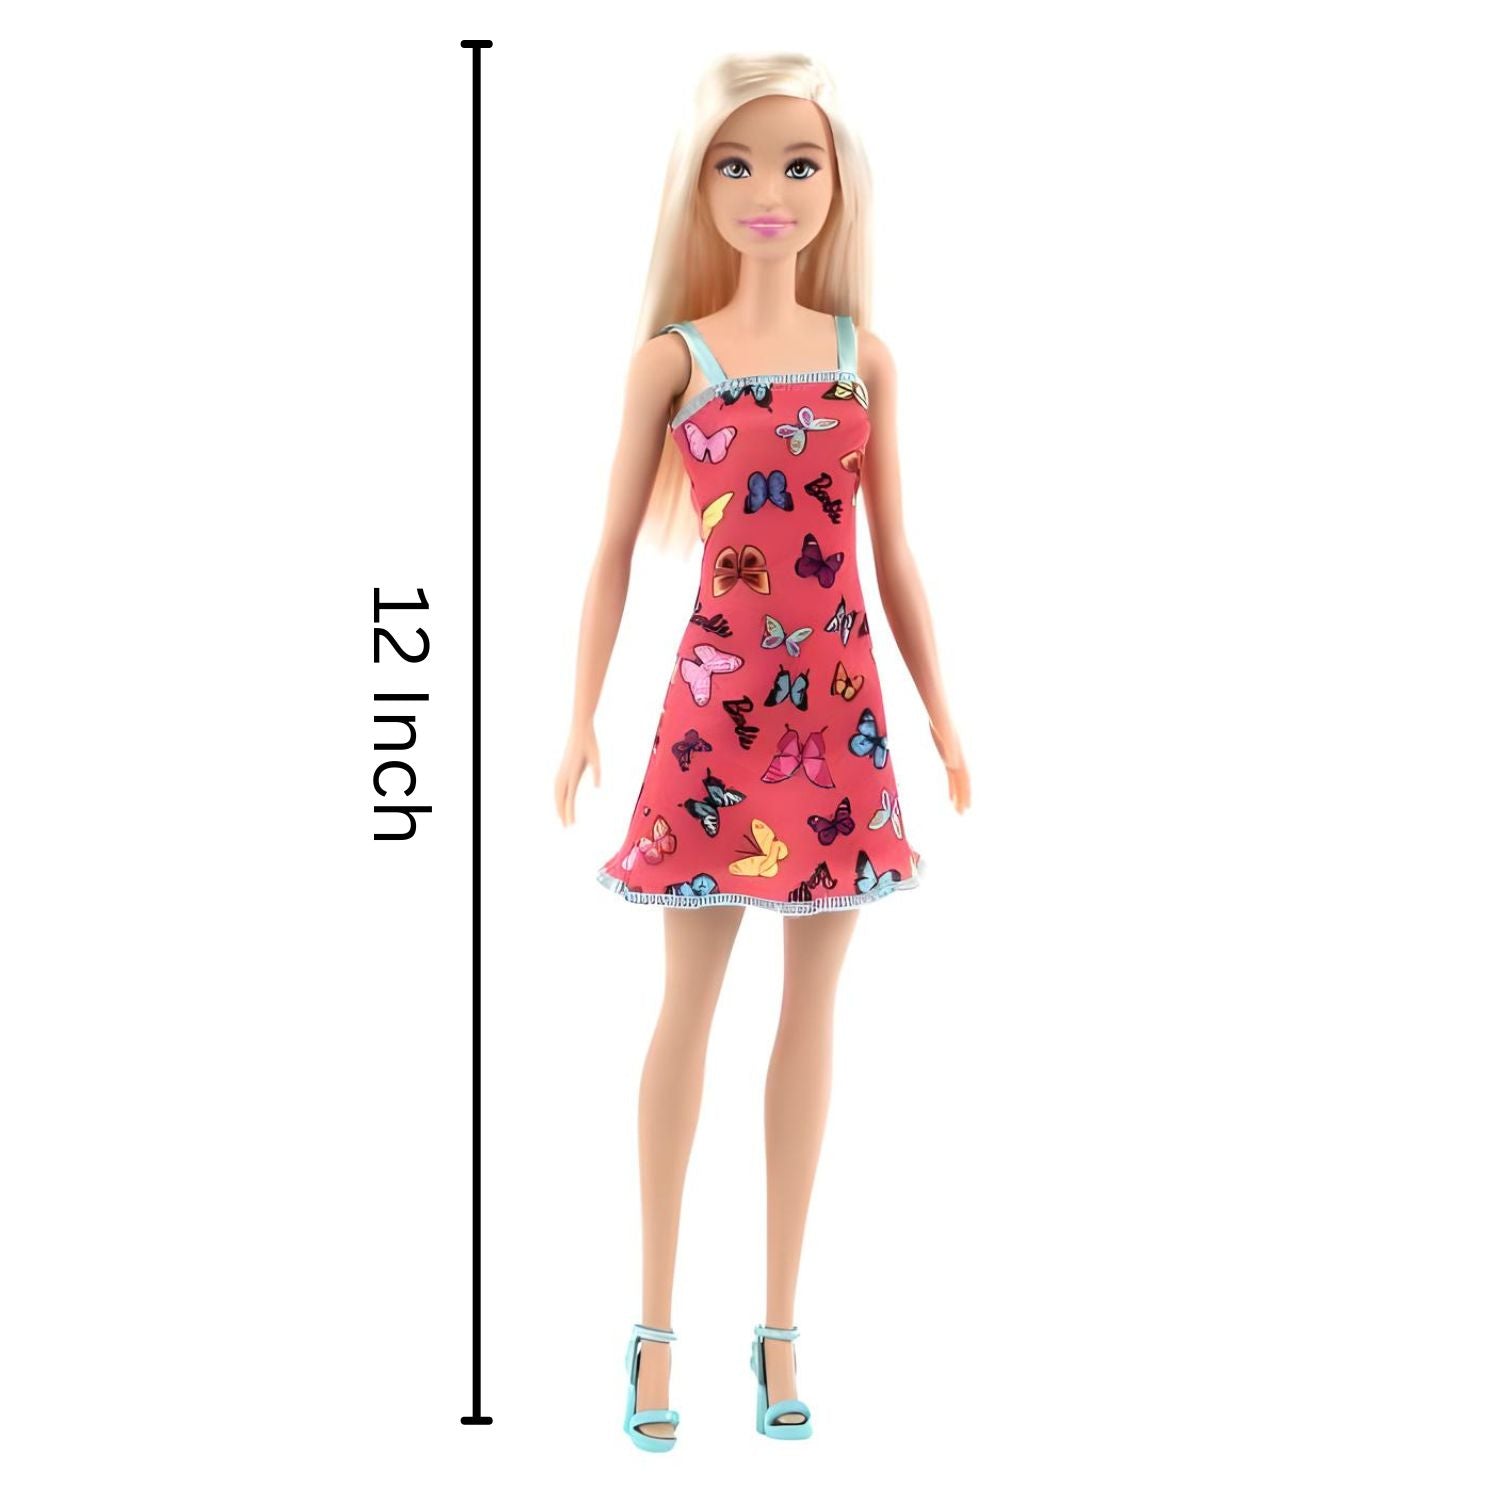 Barbie Doll Orignal HBV05 11.5 Inch Size Dress ,Blonde Hair Dressed - Color May Vary Best Gift For Girls